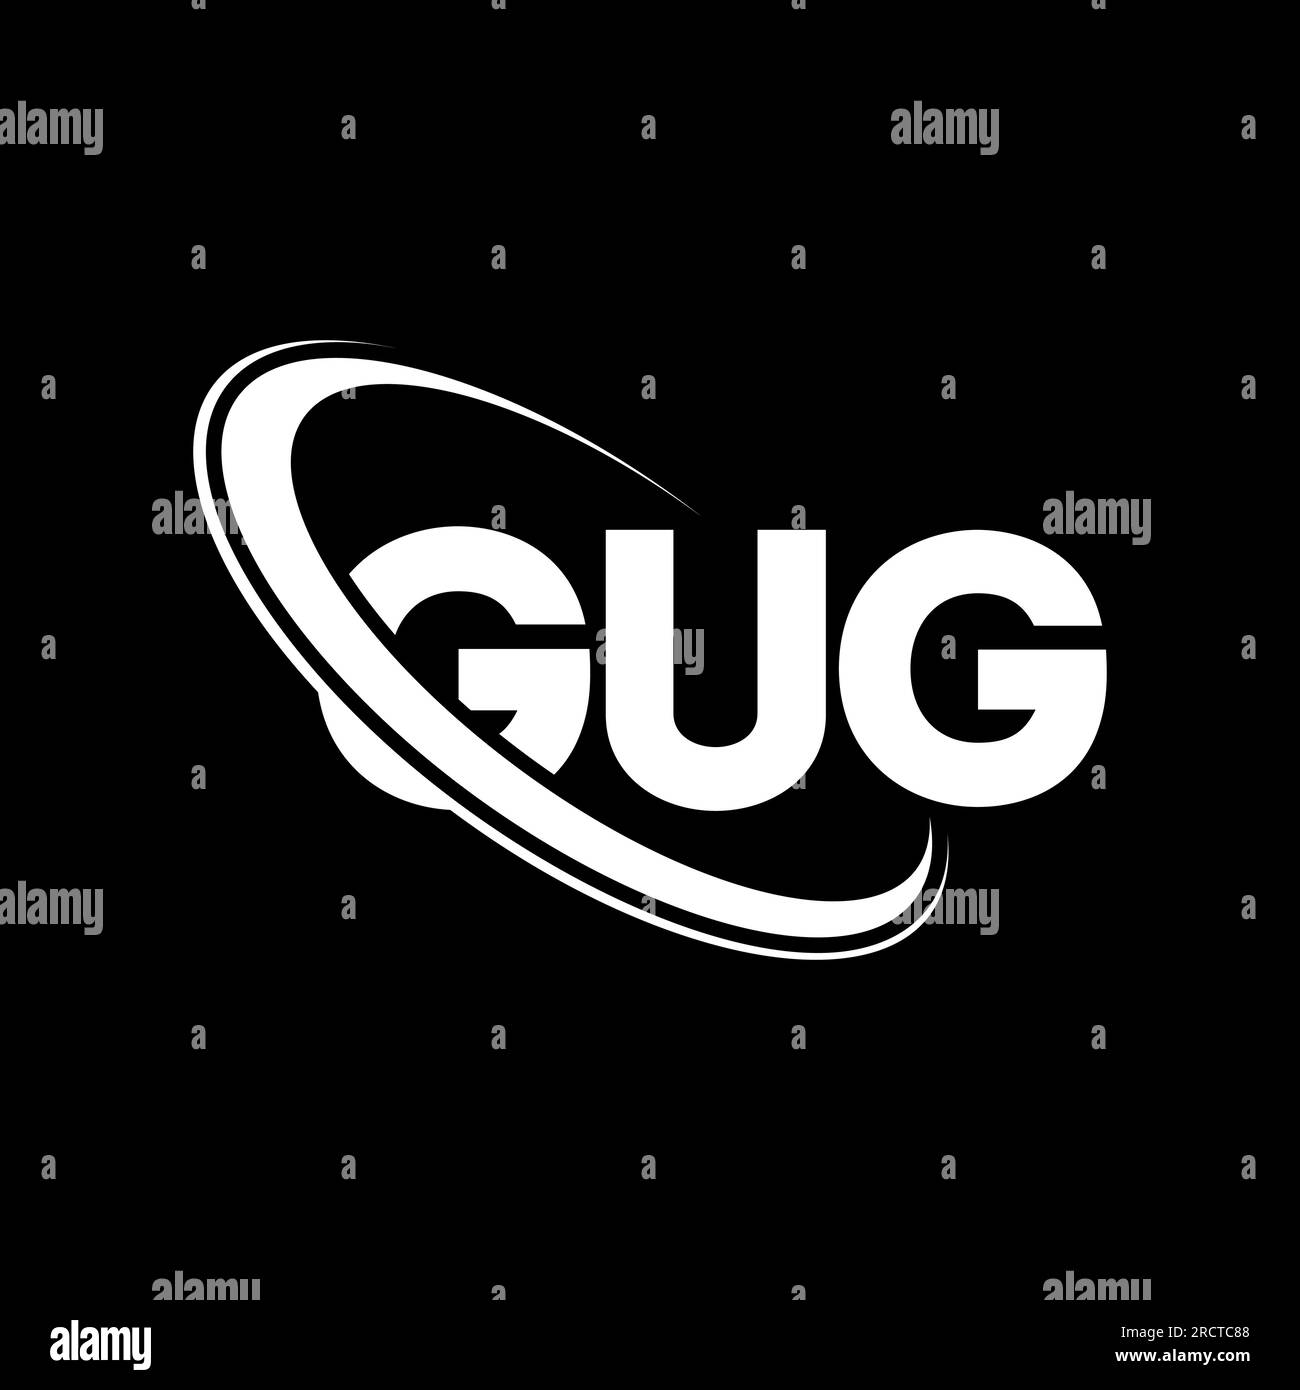 GUG logo. GUG letter. GUG letter logo design. Initials GUG logo linked with circle and uppercase monogram logo. GUG typography for technology, busines Stock Vector